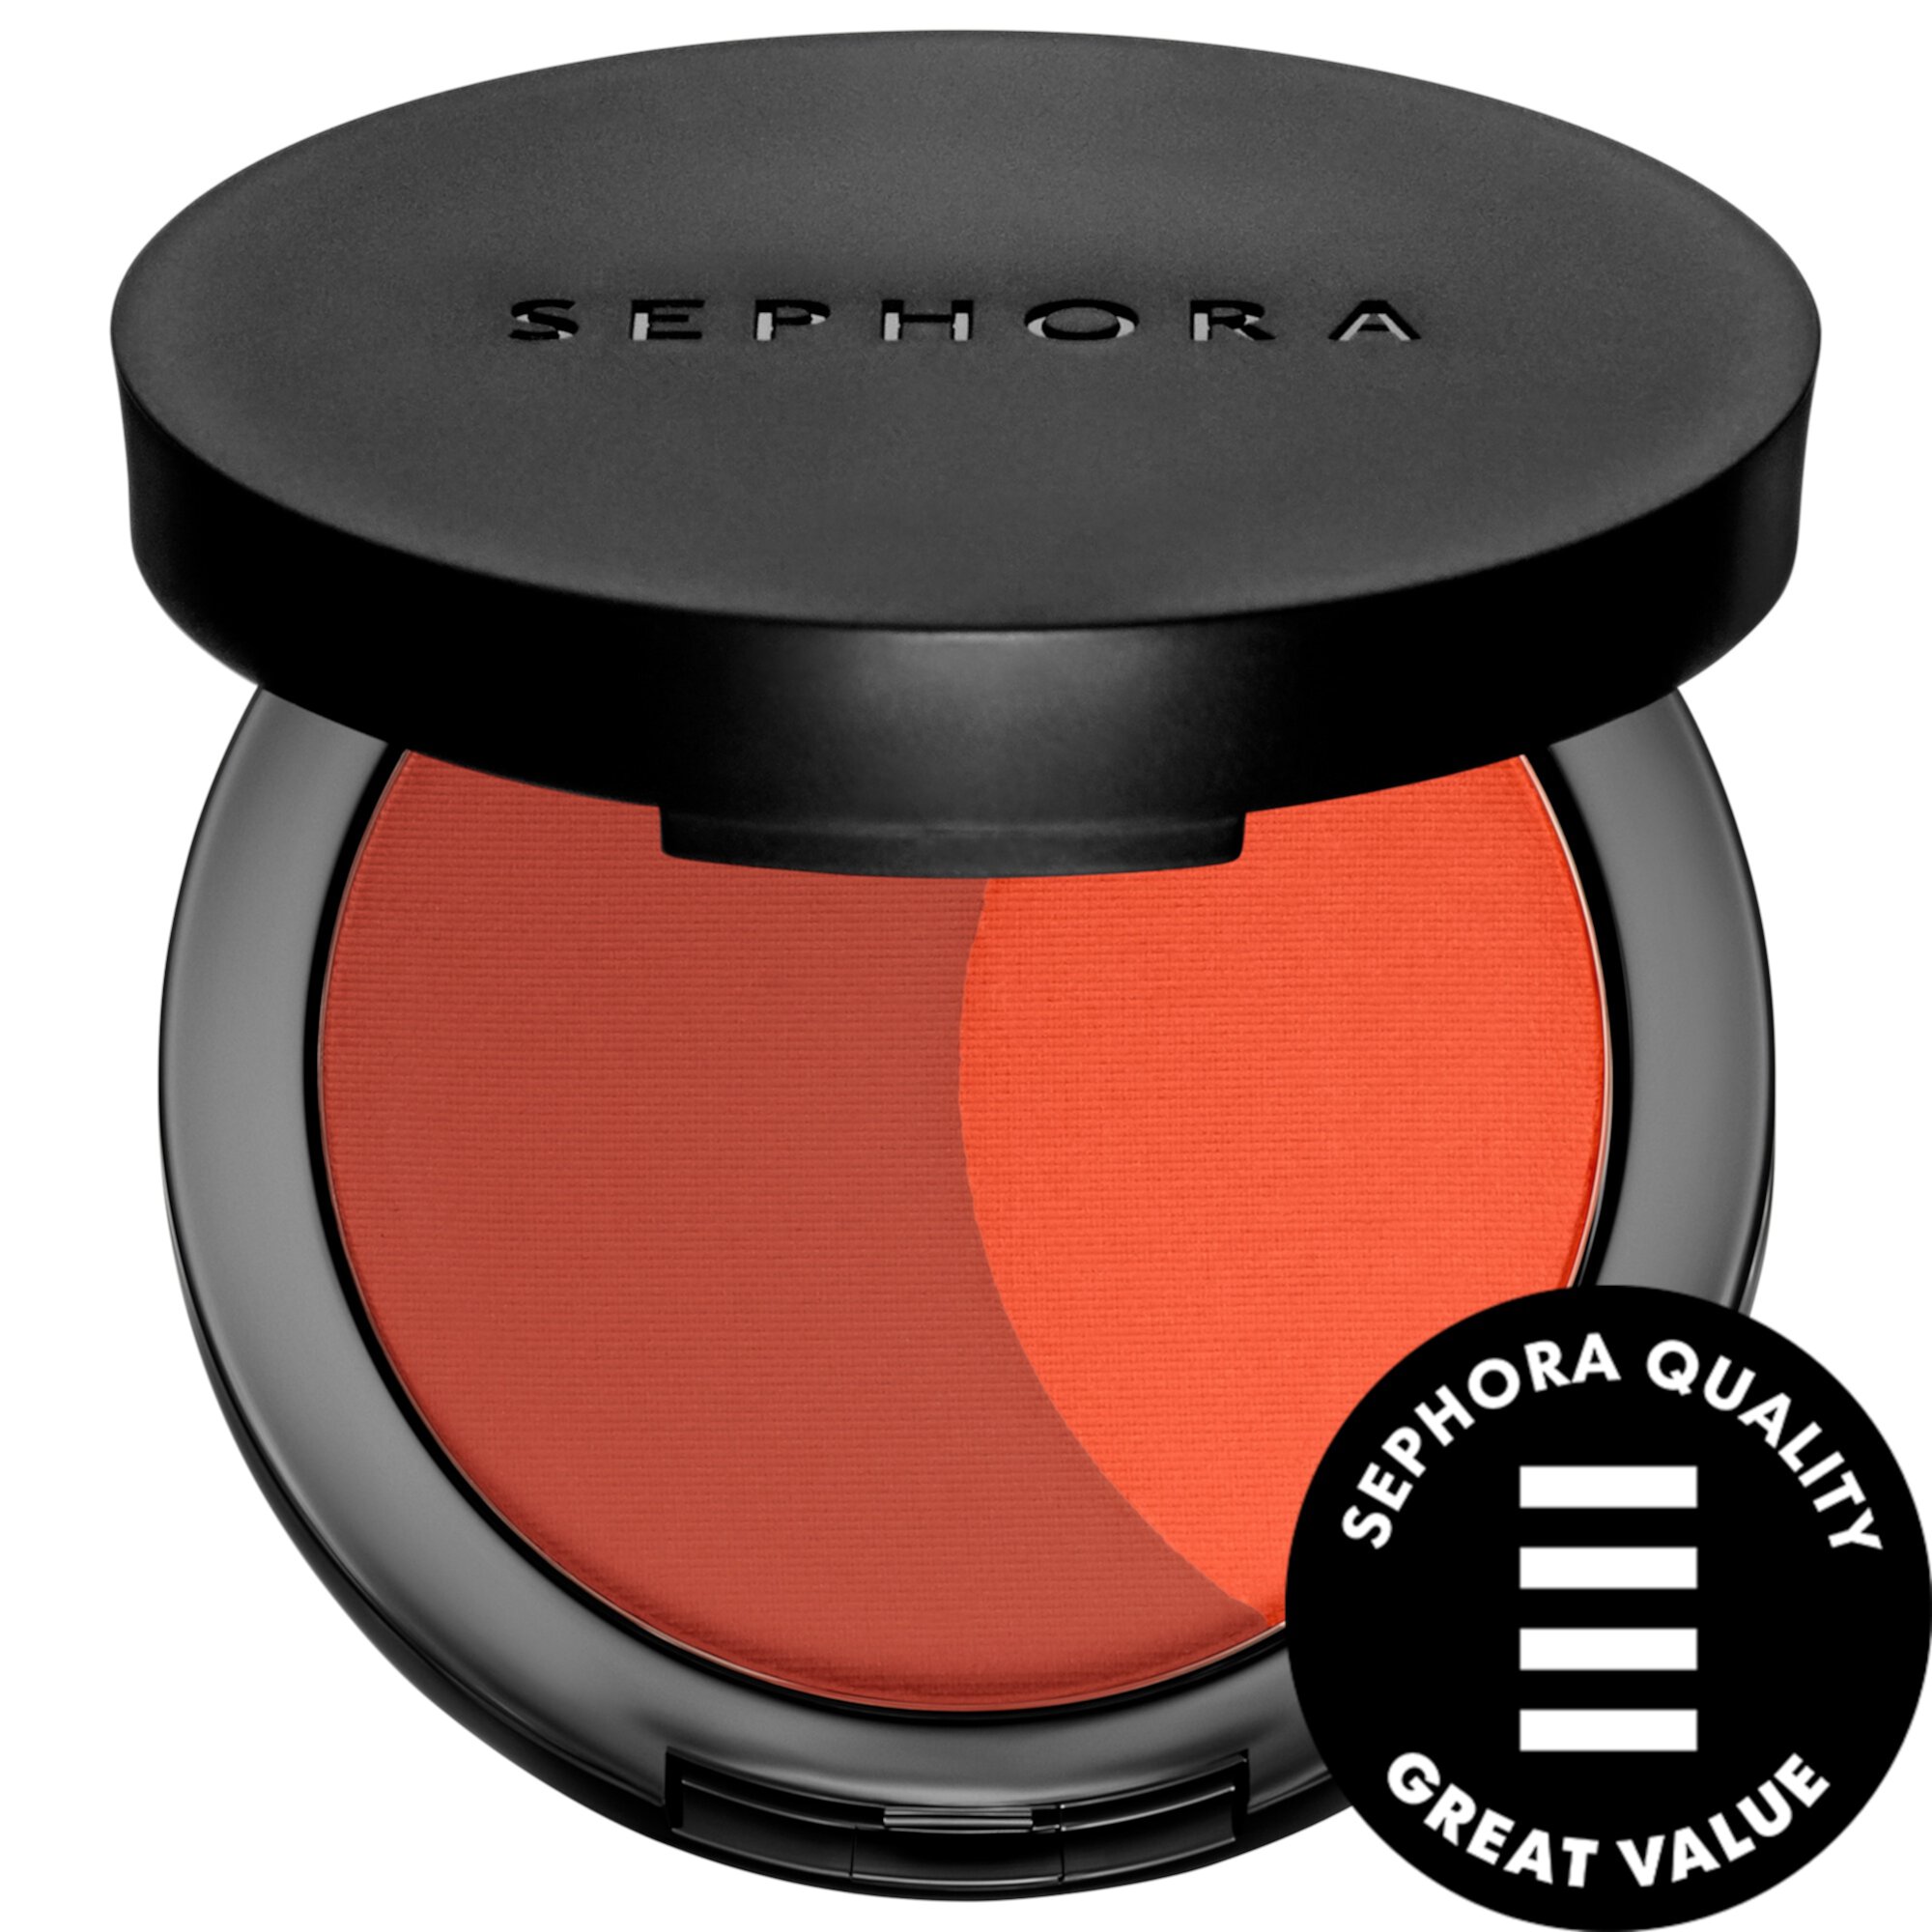 Soft Matte Perfection Blush Duos SEPHORA COLLECTION